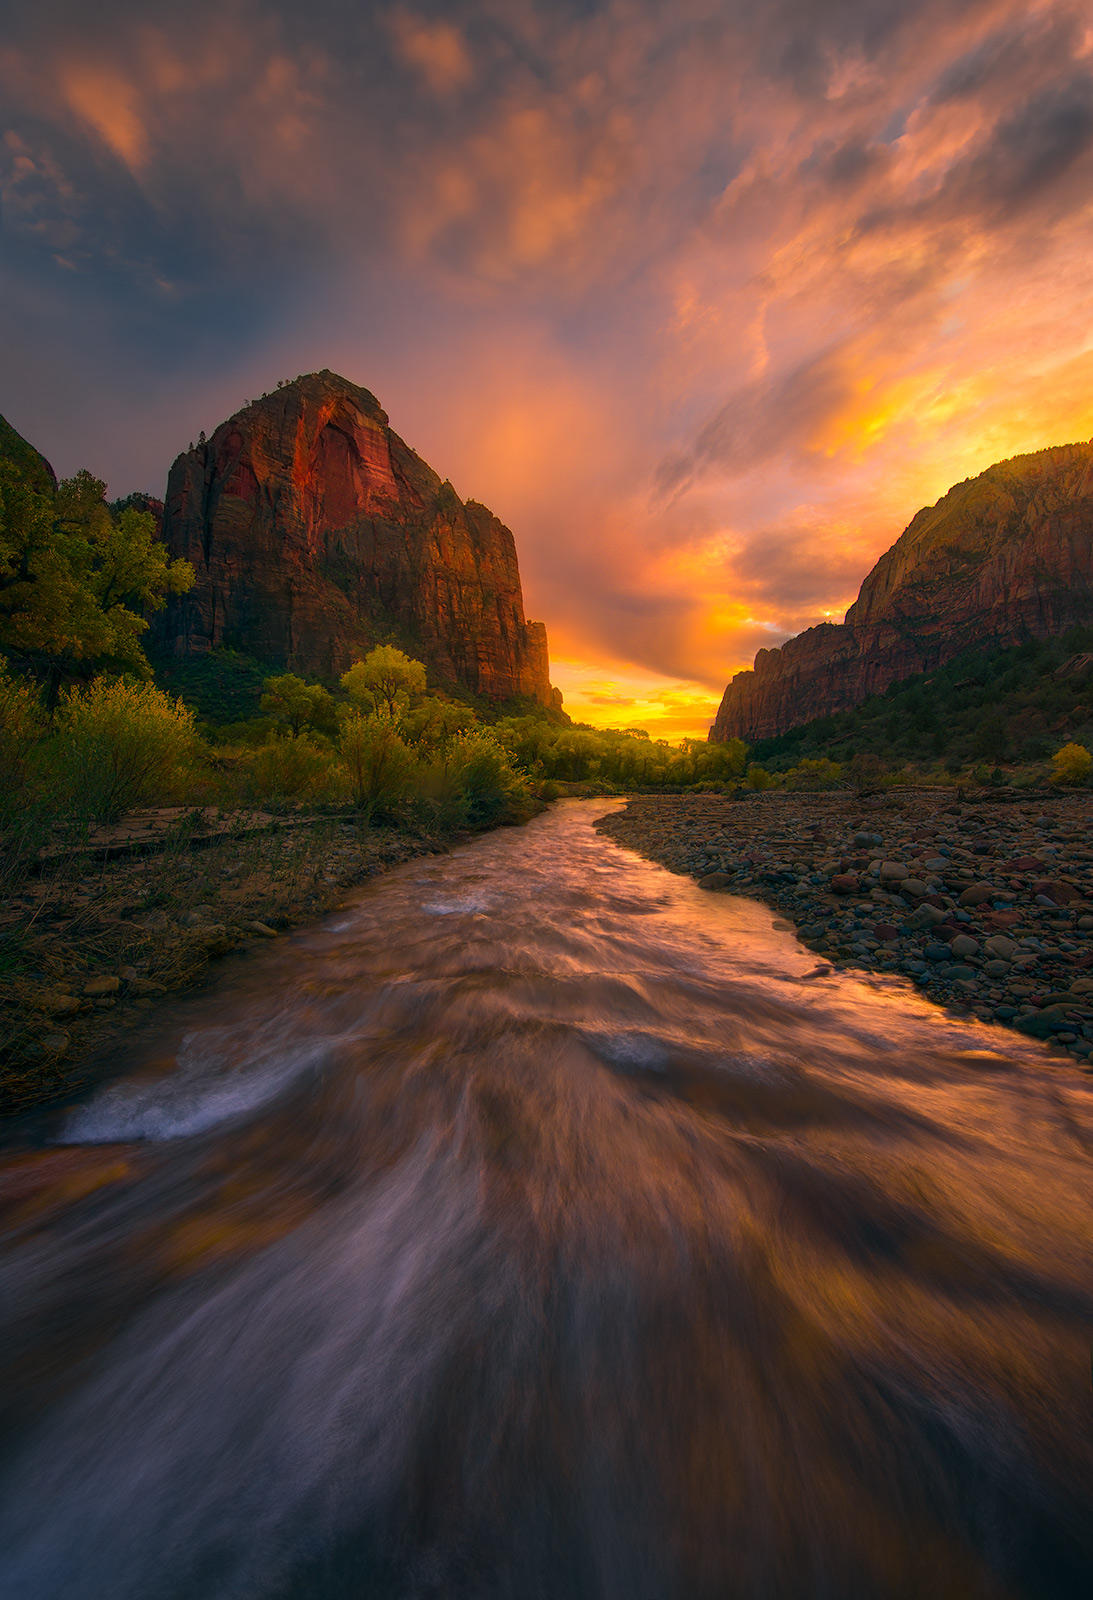 Rushing waters of Zion's Virgin river flowing through massive sandstone towers throughout.&nbsp;